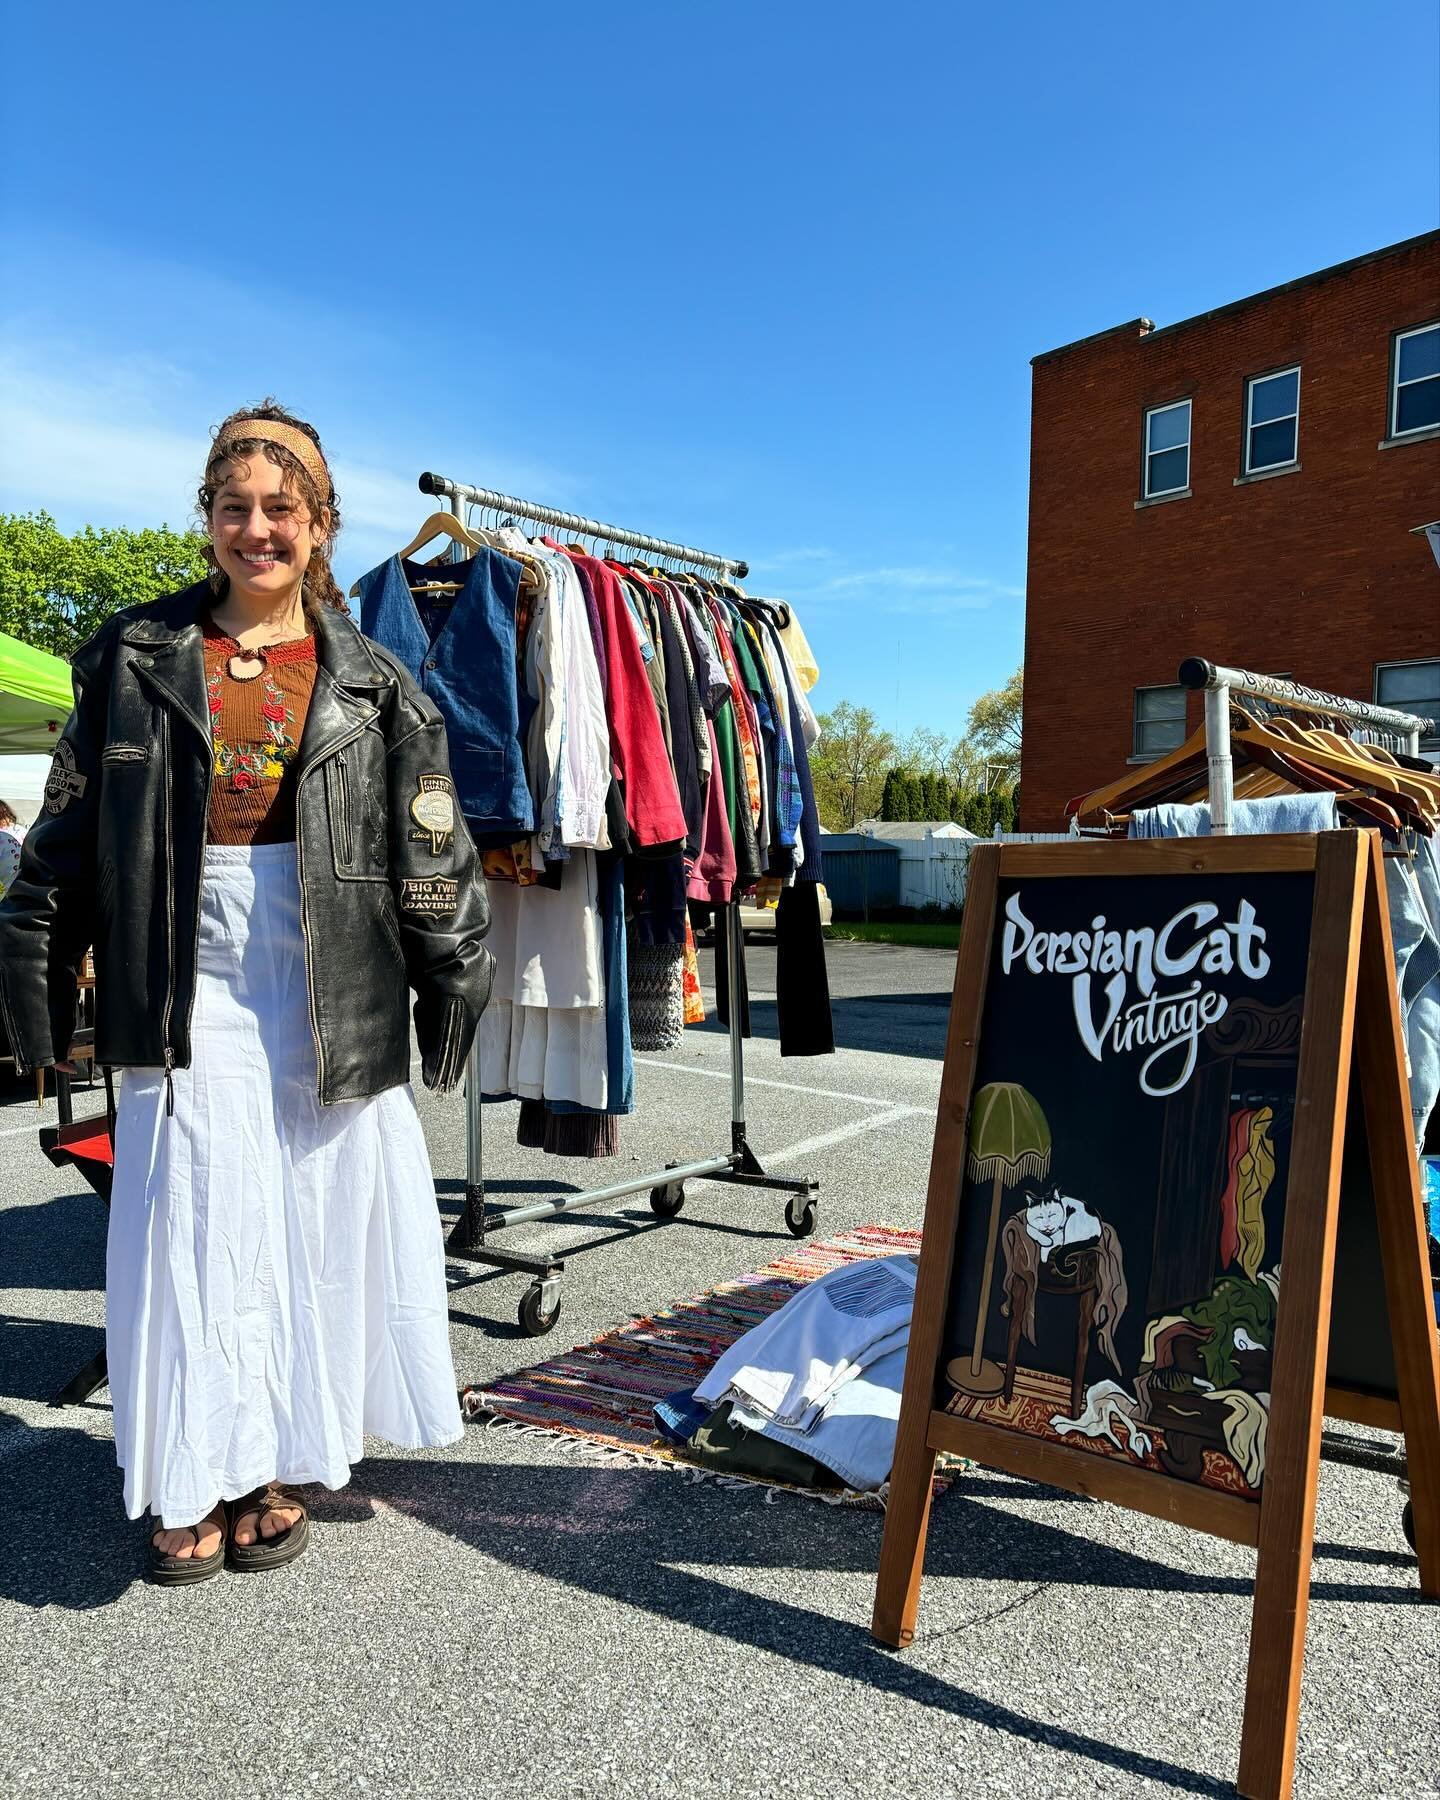 Out here at the Trellis Marketplace event! 10-4. Come see us! 🌞 &hellip; #persiancatvintage #ootd #ootdfashion #vintage #vintagestyle #vintageclothing #fashion #explorepage